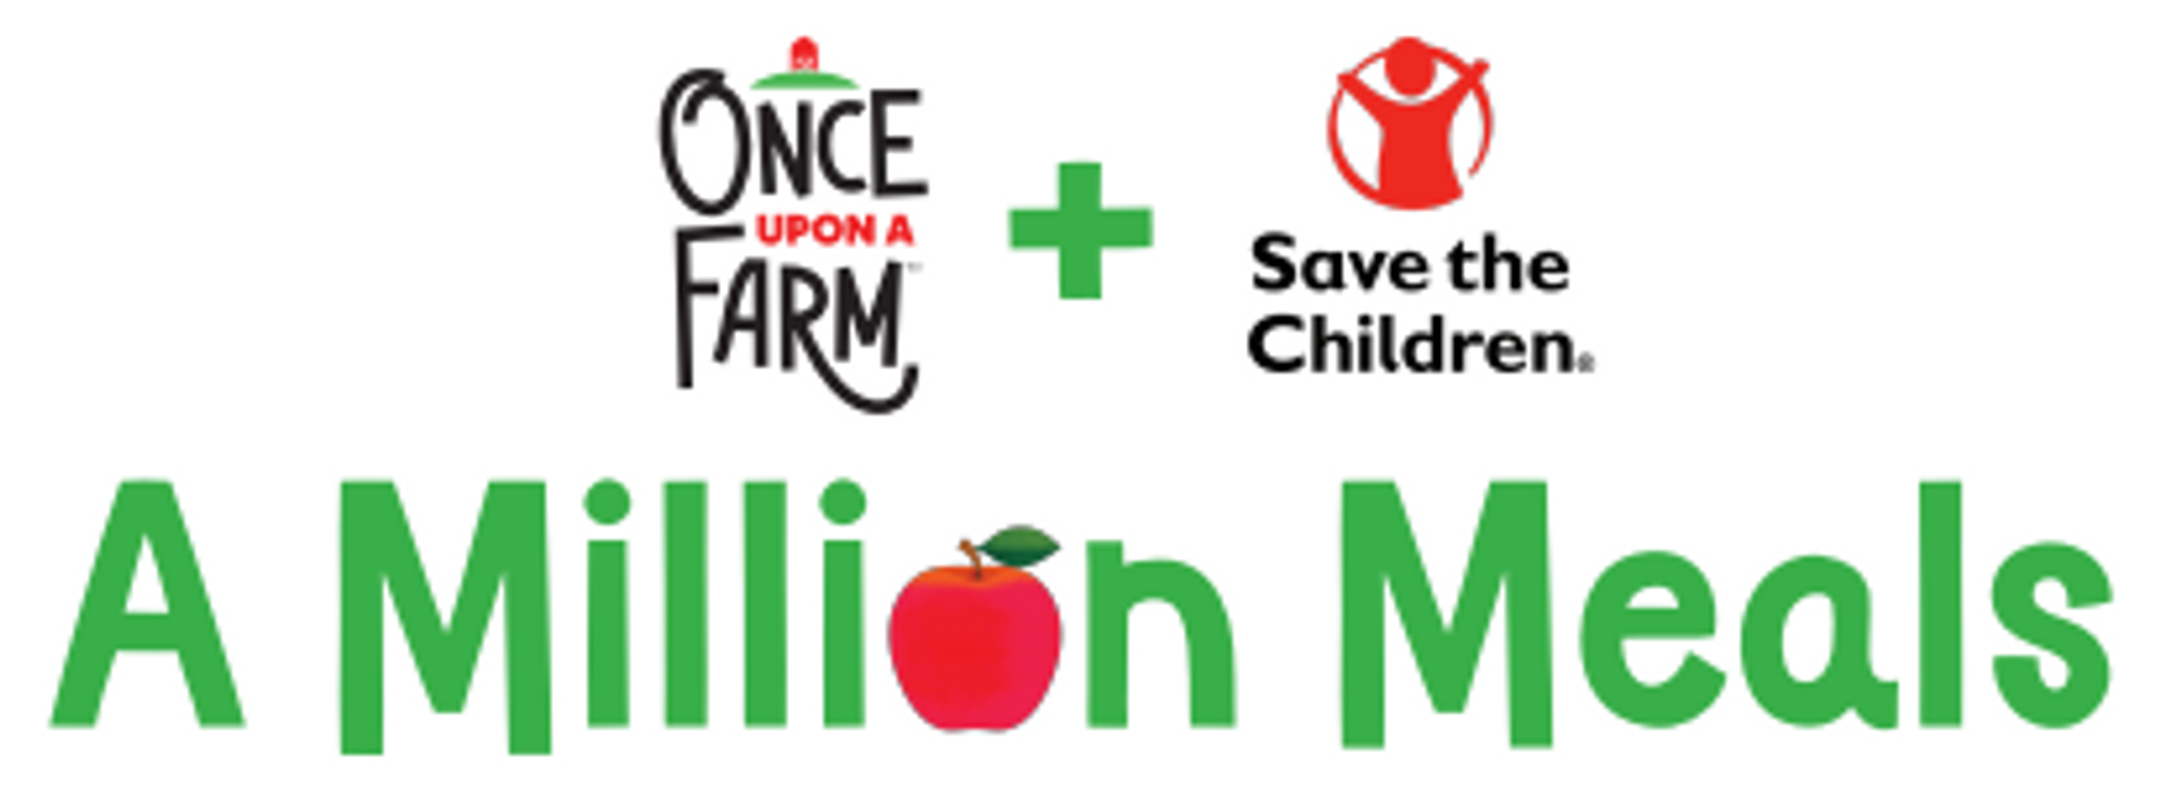 Once Upon a Farm Save the Children A Million Meals logo